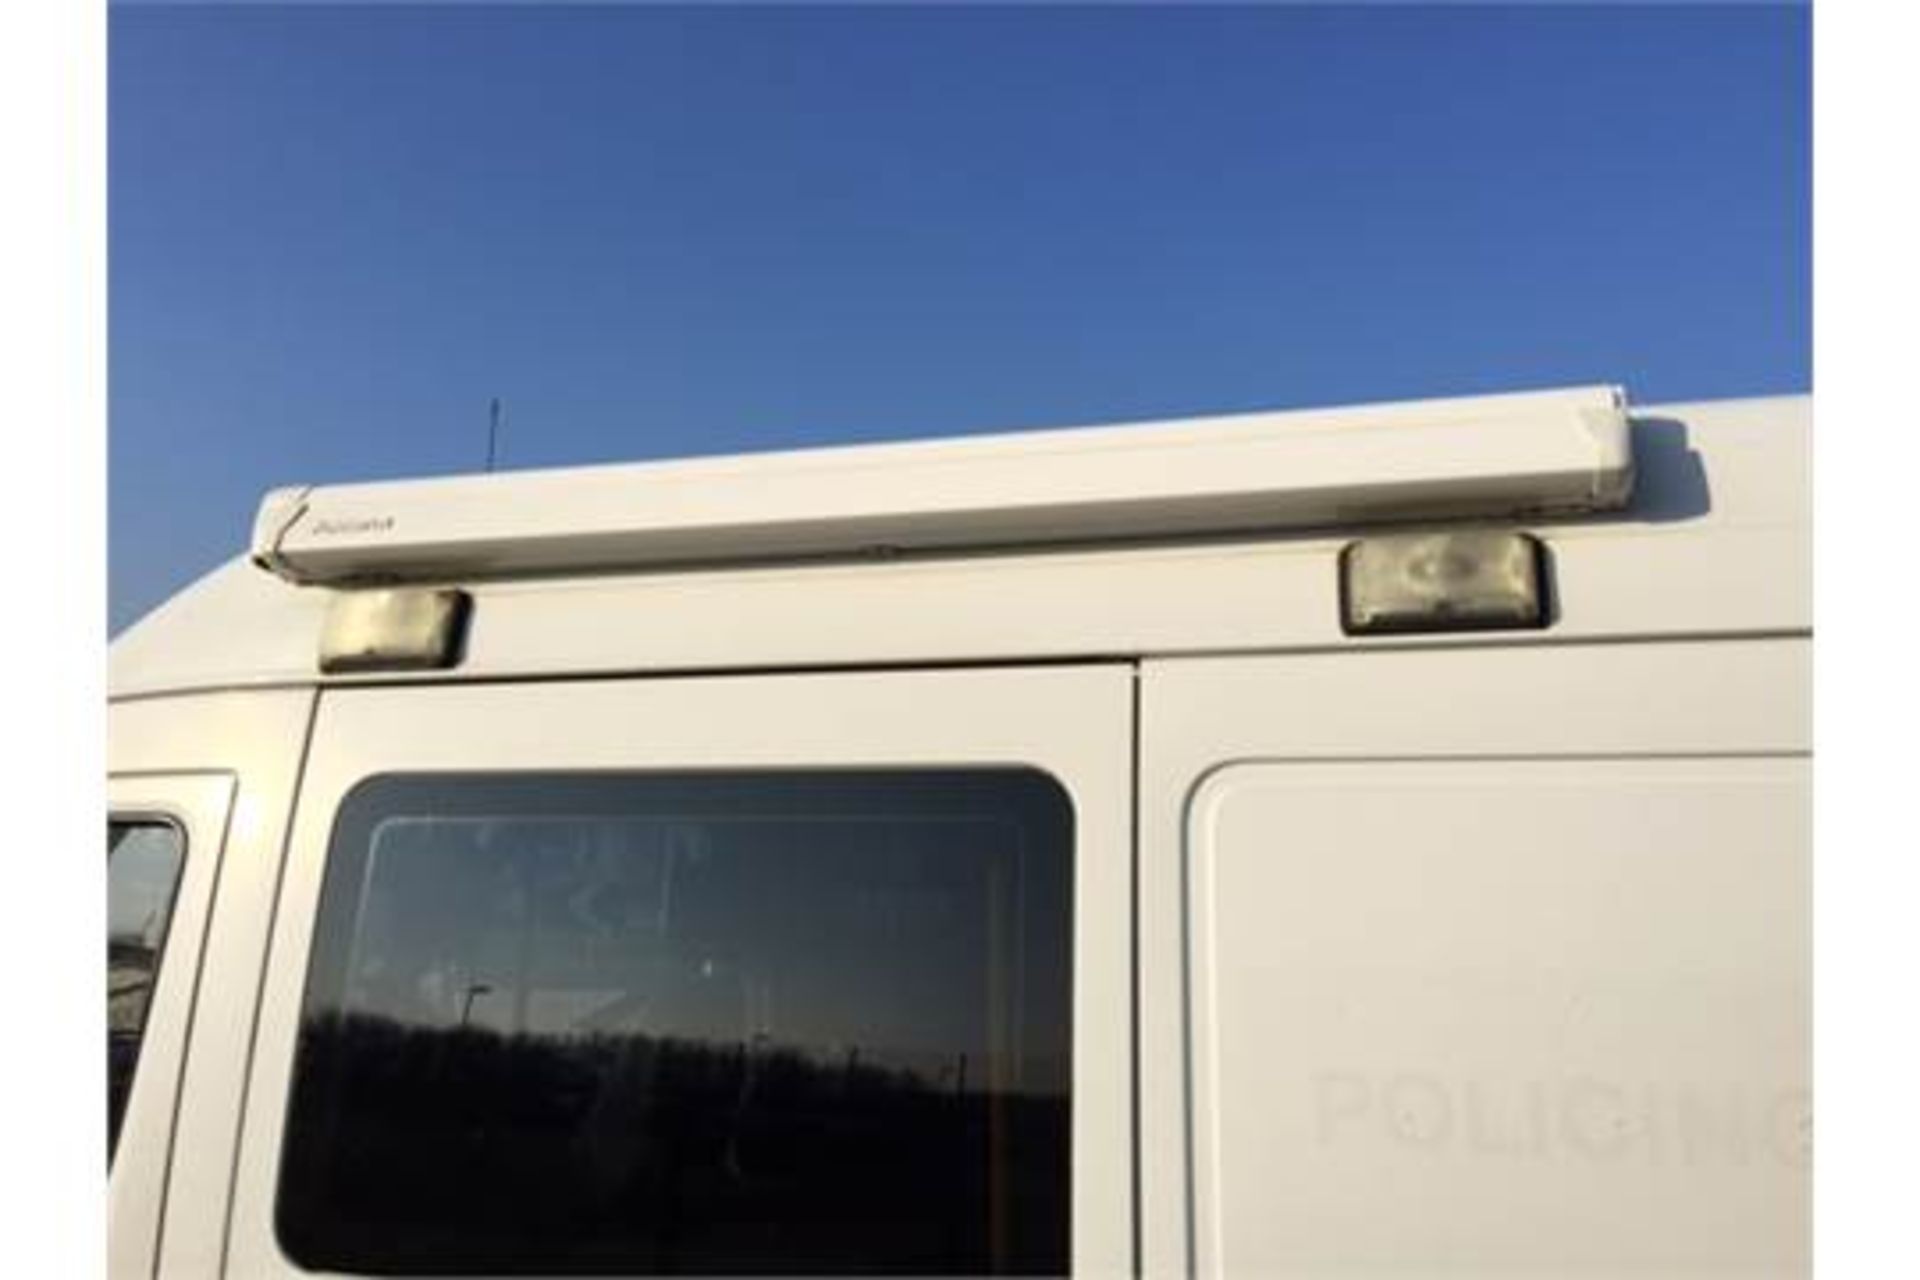 2005 Mercedes Sprinter 311 cdi 2148cc Diesel Van with side windows Owned and used by the police from - Image 5 of 23